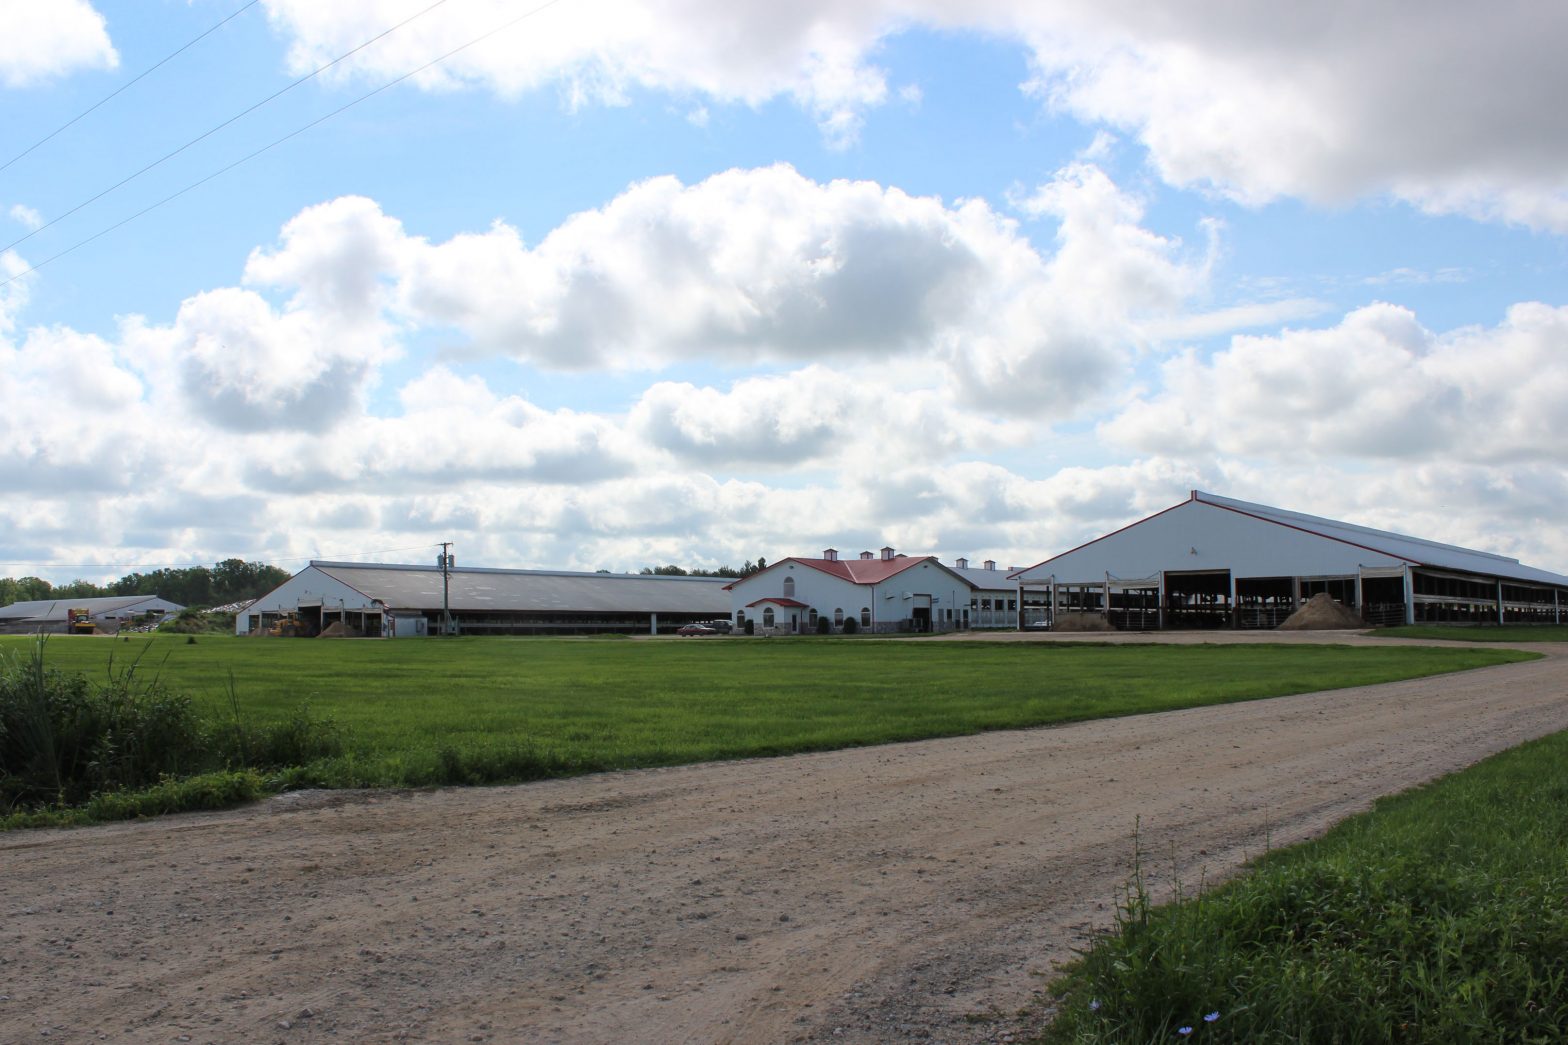 Aquila Dairy Farms in Bad Axe, Michigan is owned and operated by the Verhaar family.  Through gradual expansions over 17 years, the farm grew to its current size of about 2,000 milking cows.